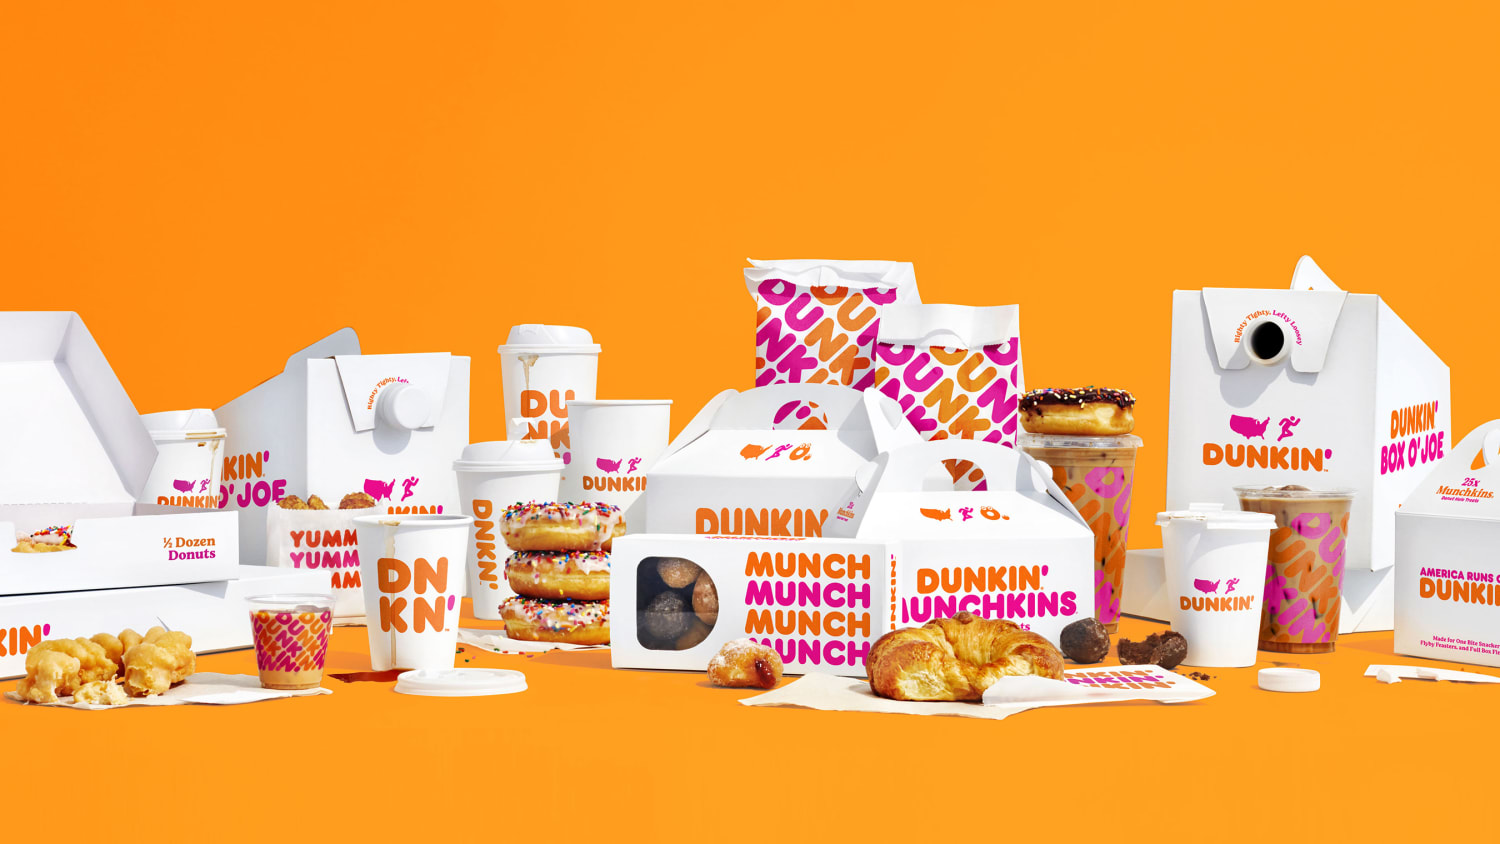 Dunkin' Donuts officially changed its name to Dunkin'